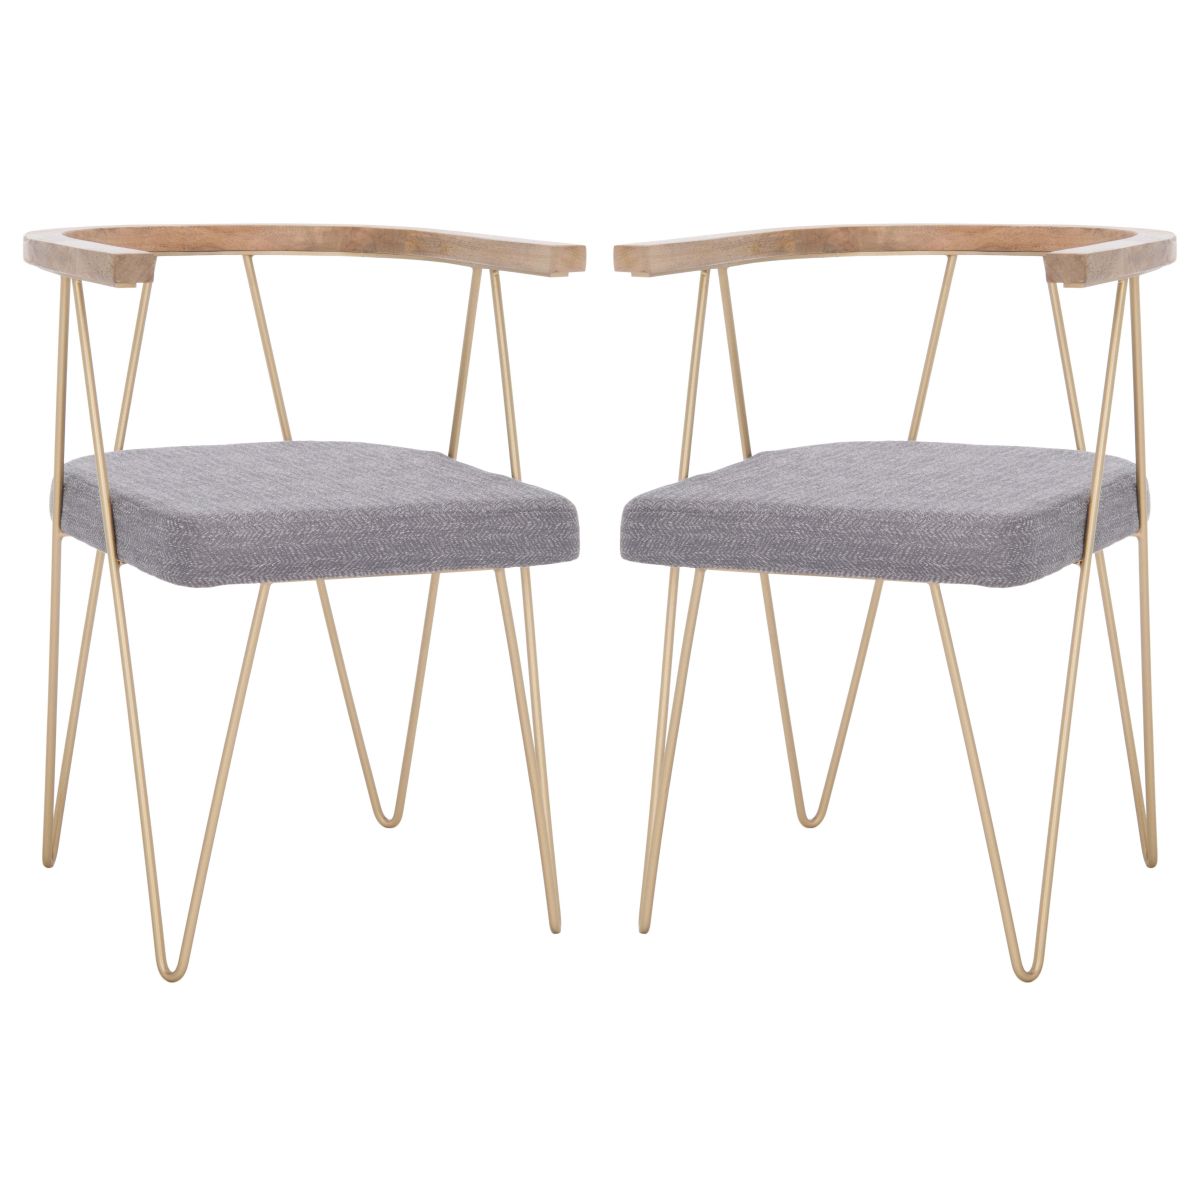 Safavieh Couture Krissy Hairpin Leg Dining Chair (Set of 2) - Gold / Grey